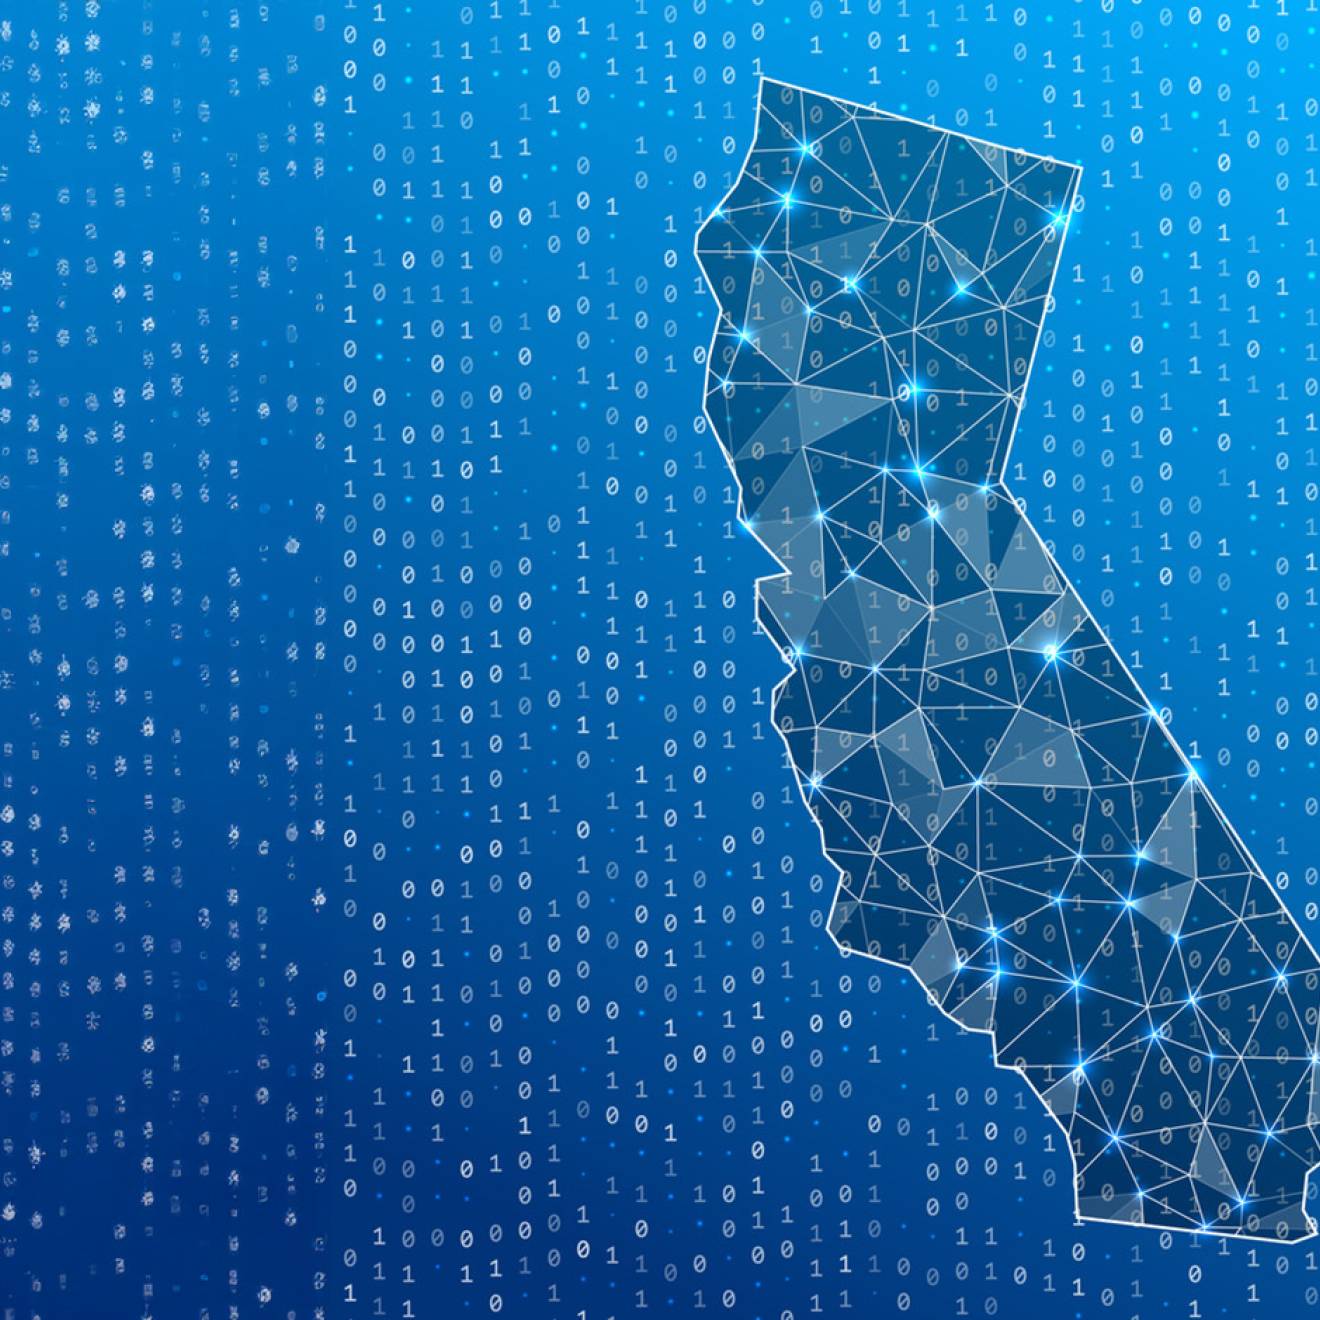 An illustration of a map of California laced with a net of lines connected by glowing nodes floating on a field of 0s and 1s